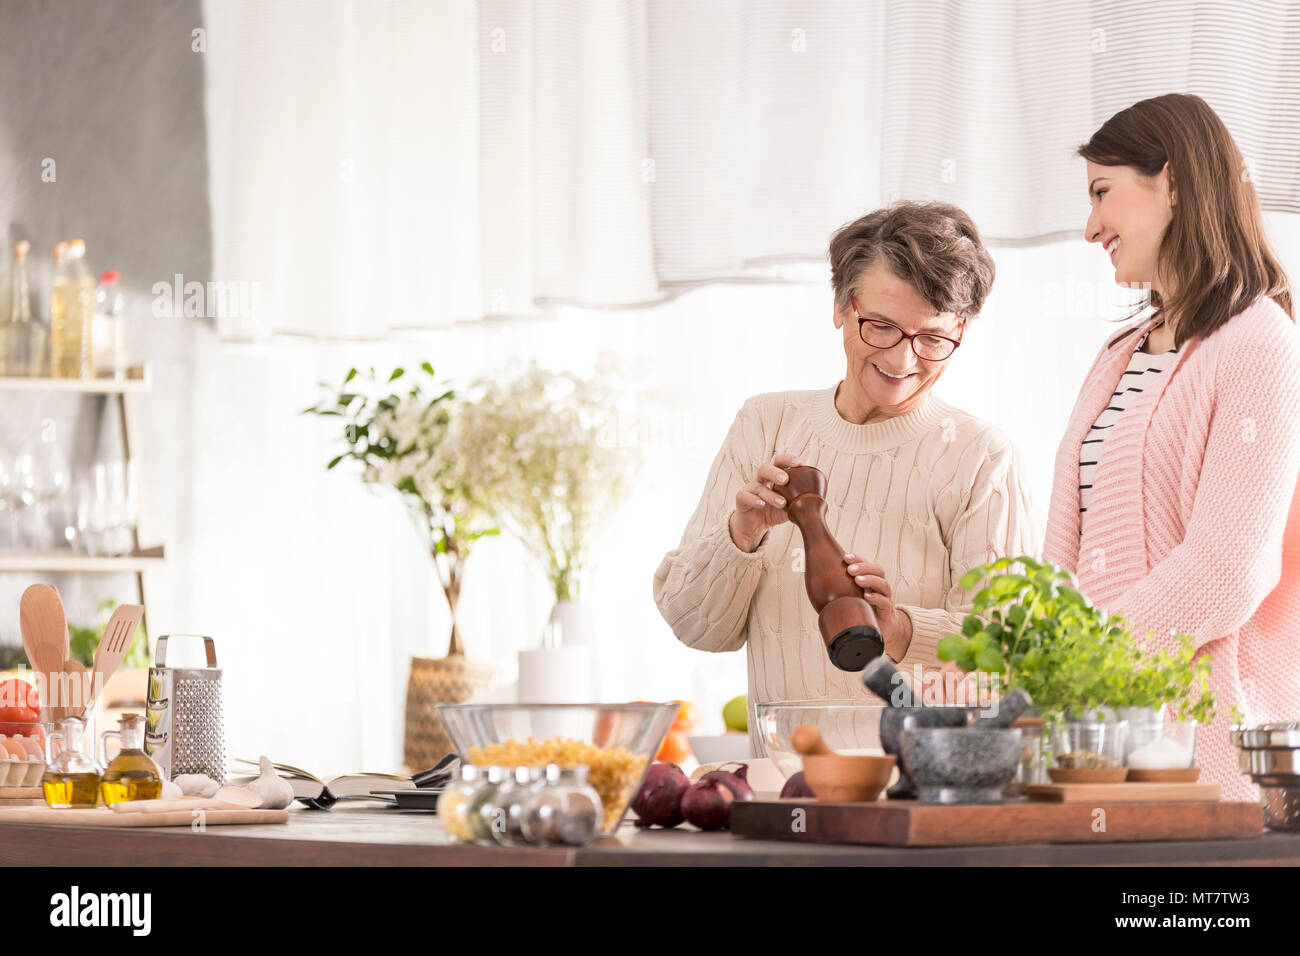 Smiling granddaughter and grandmother cooking in modern kitchen Stock Photo